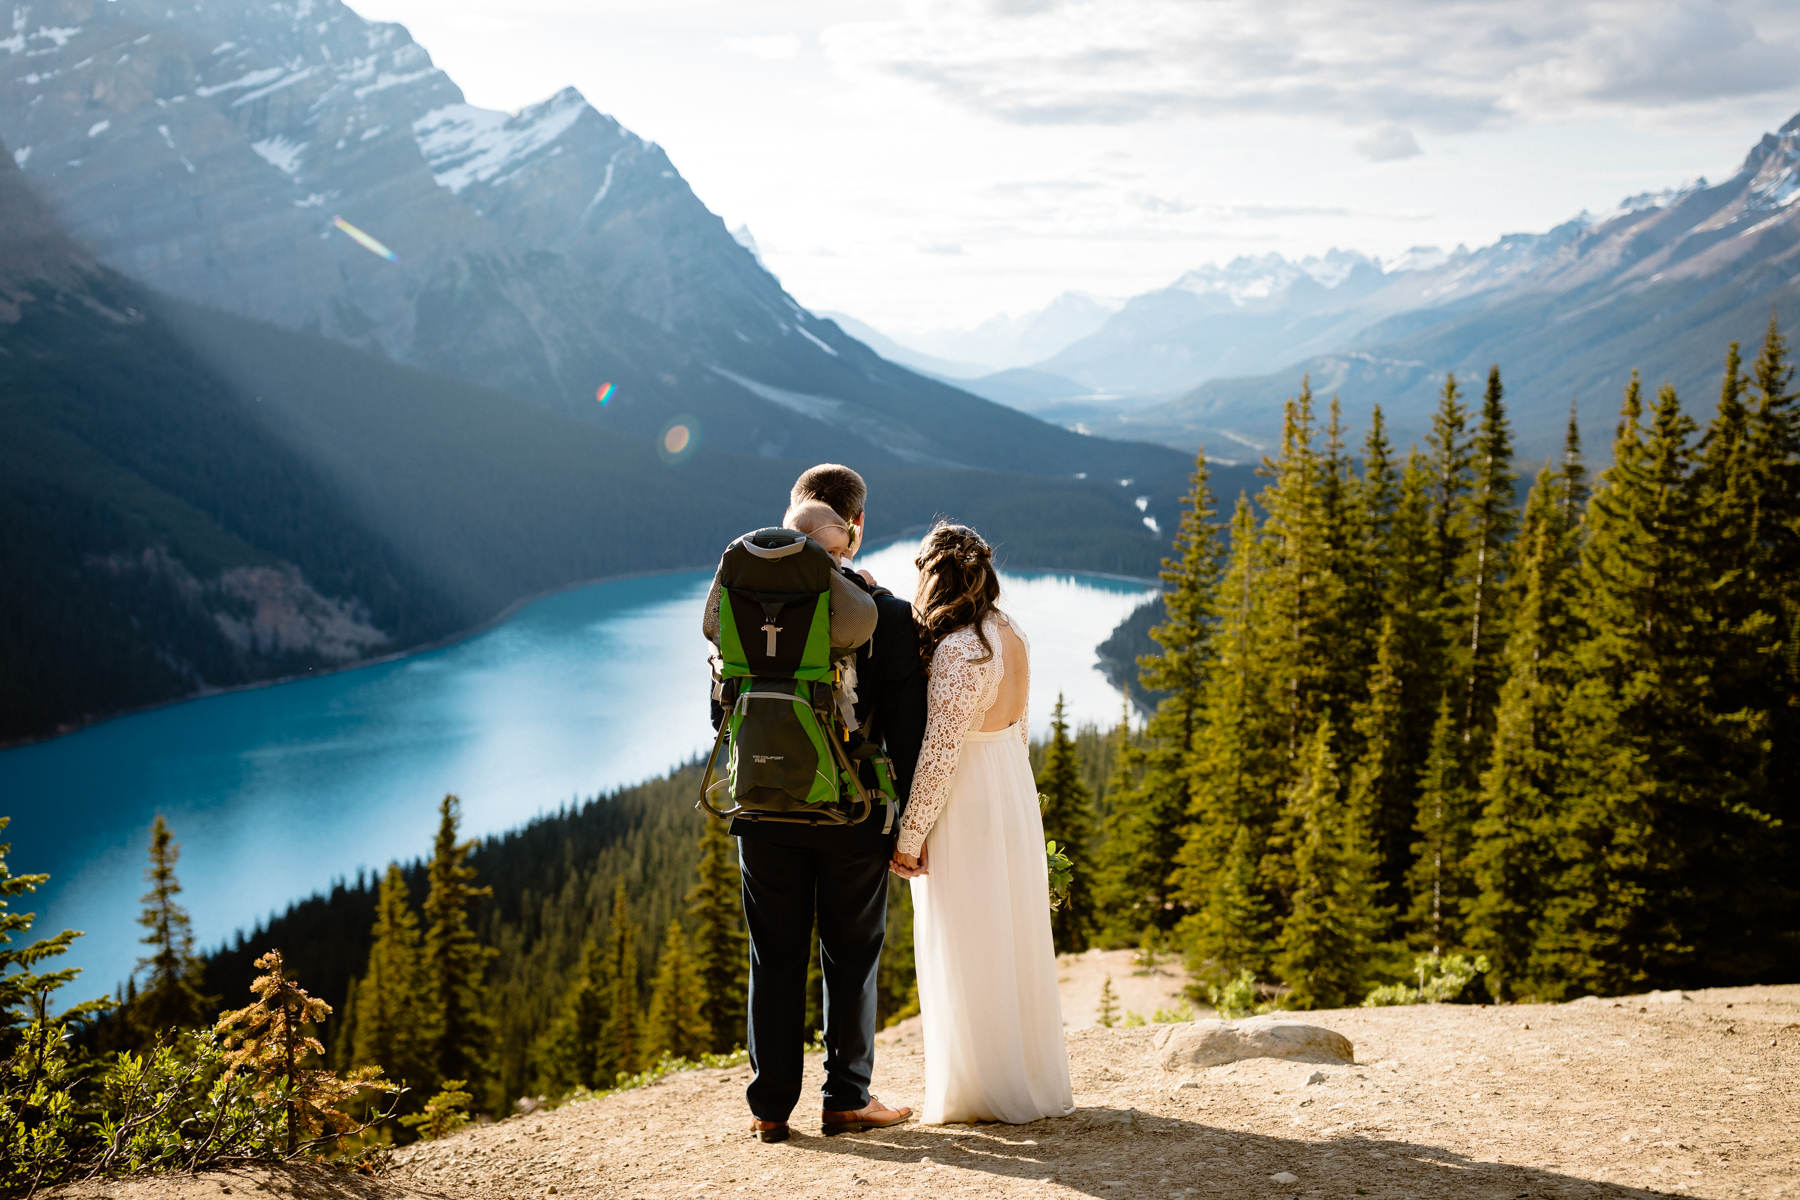 Vow Renewal Photography in Banff - Image 15